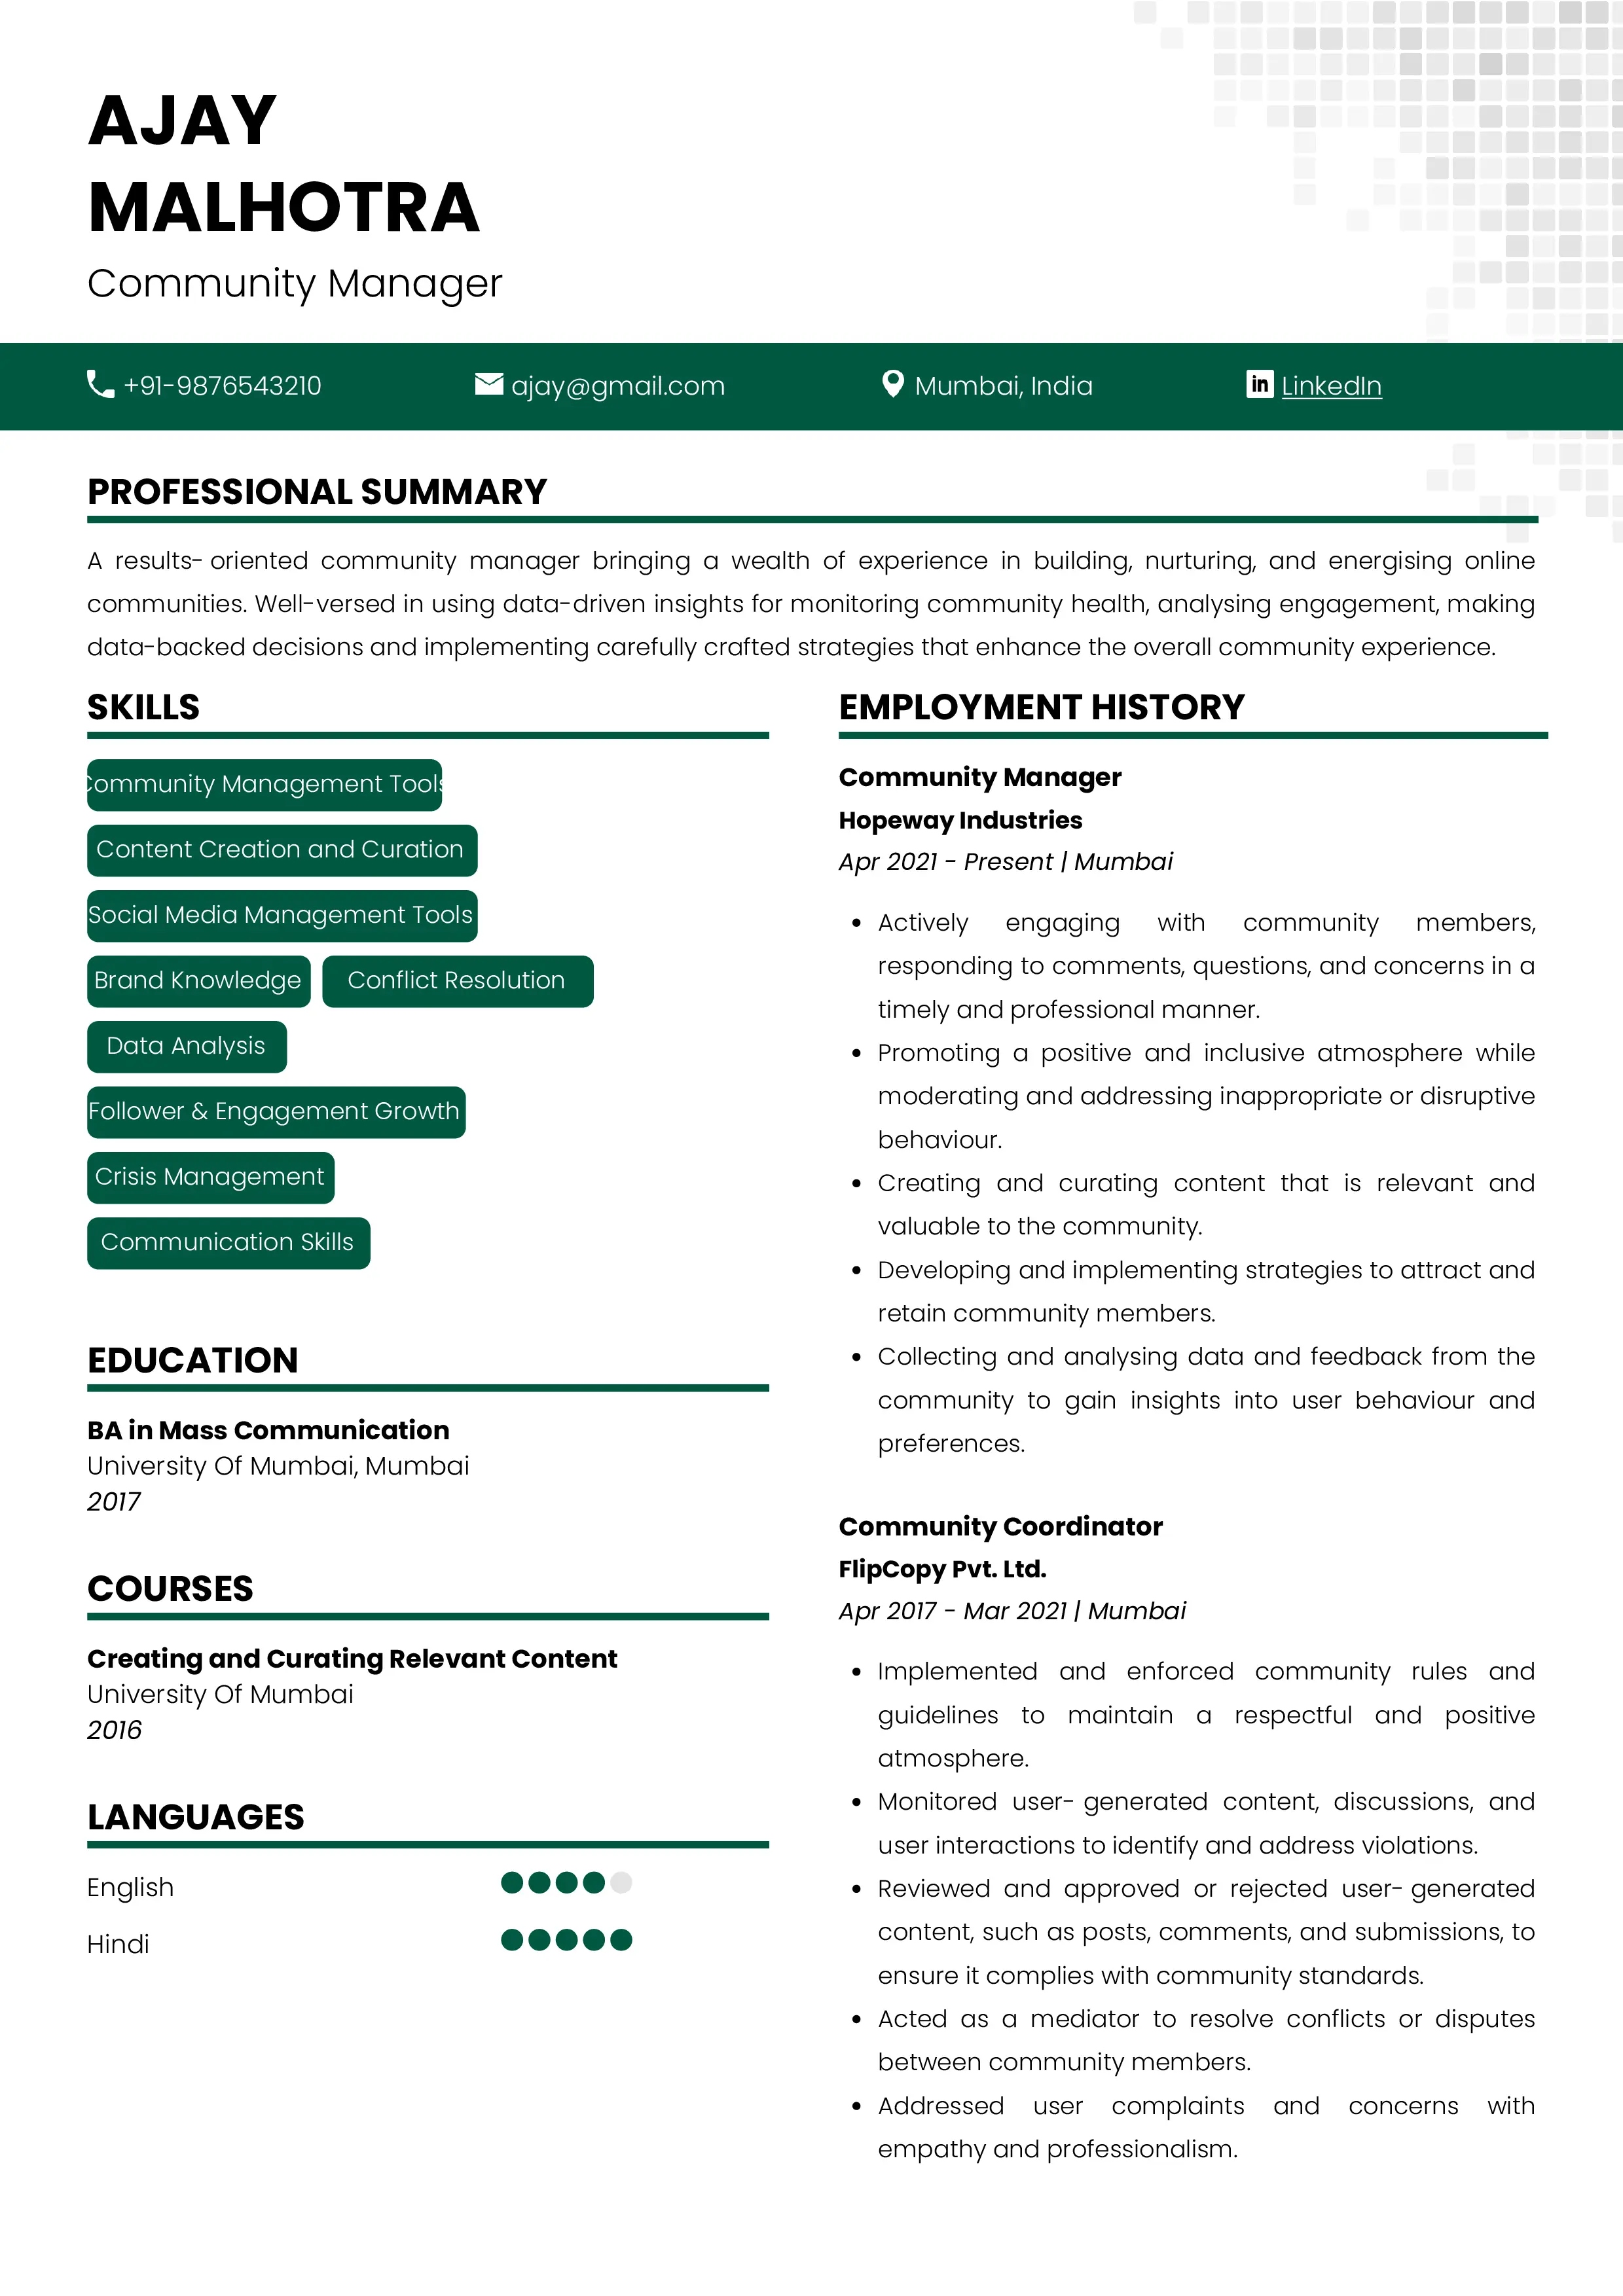 Sample Resume of Community Manager | Free Resume Templates & Samples on Resumod.co